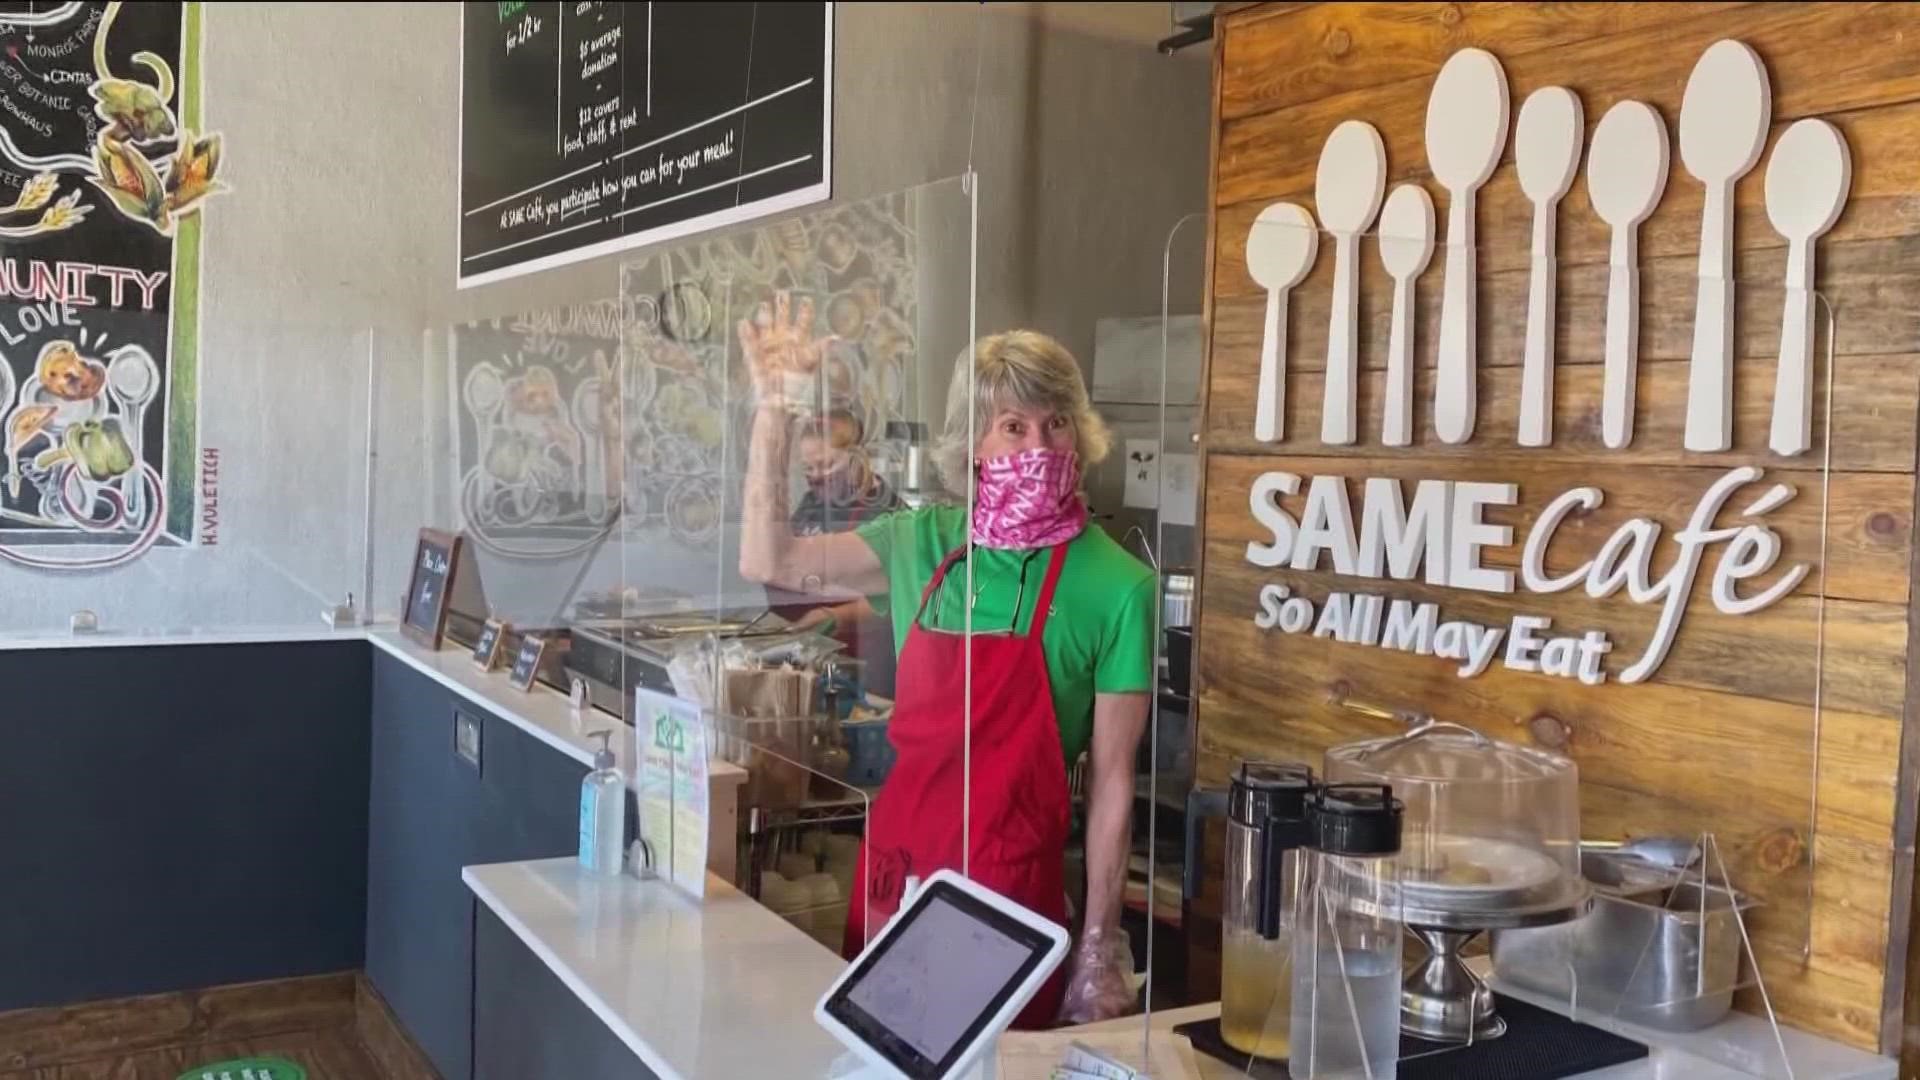 SAME Café works to fight food insecurity by offering food in exchange for volunteering time or donating money or produce.